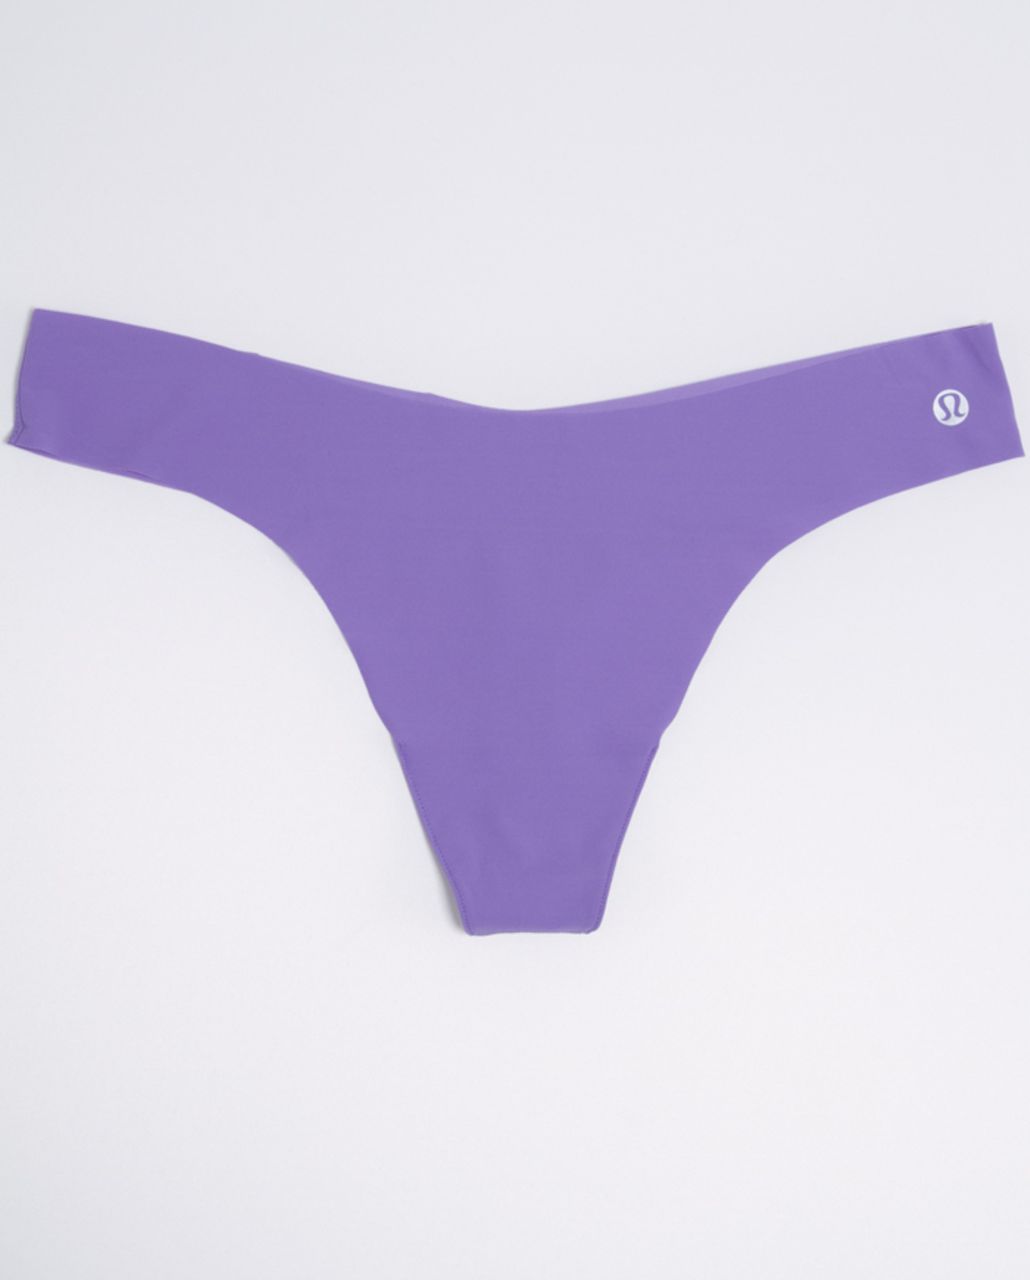 Lululemon Smooth Moves Thong - Grapeseed